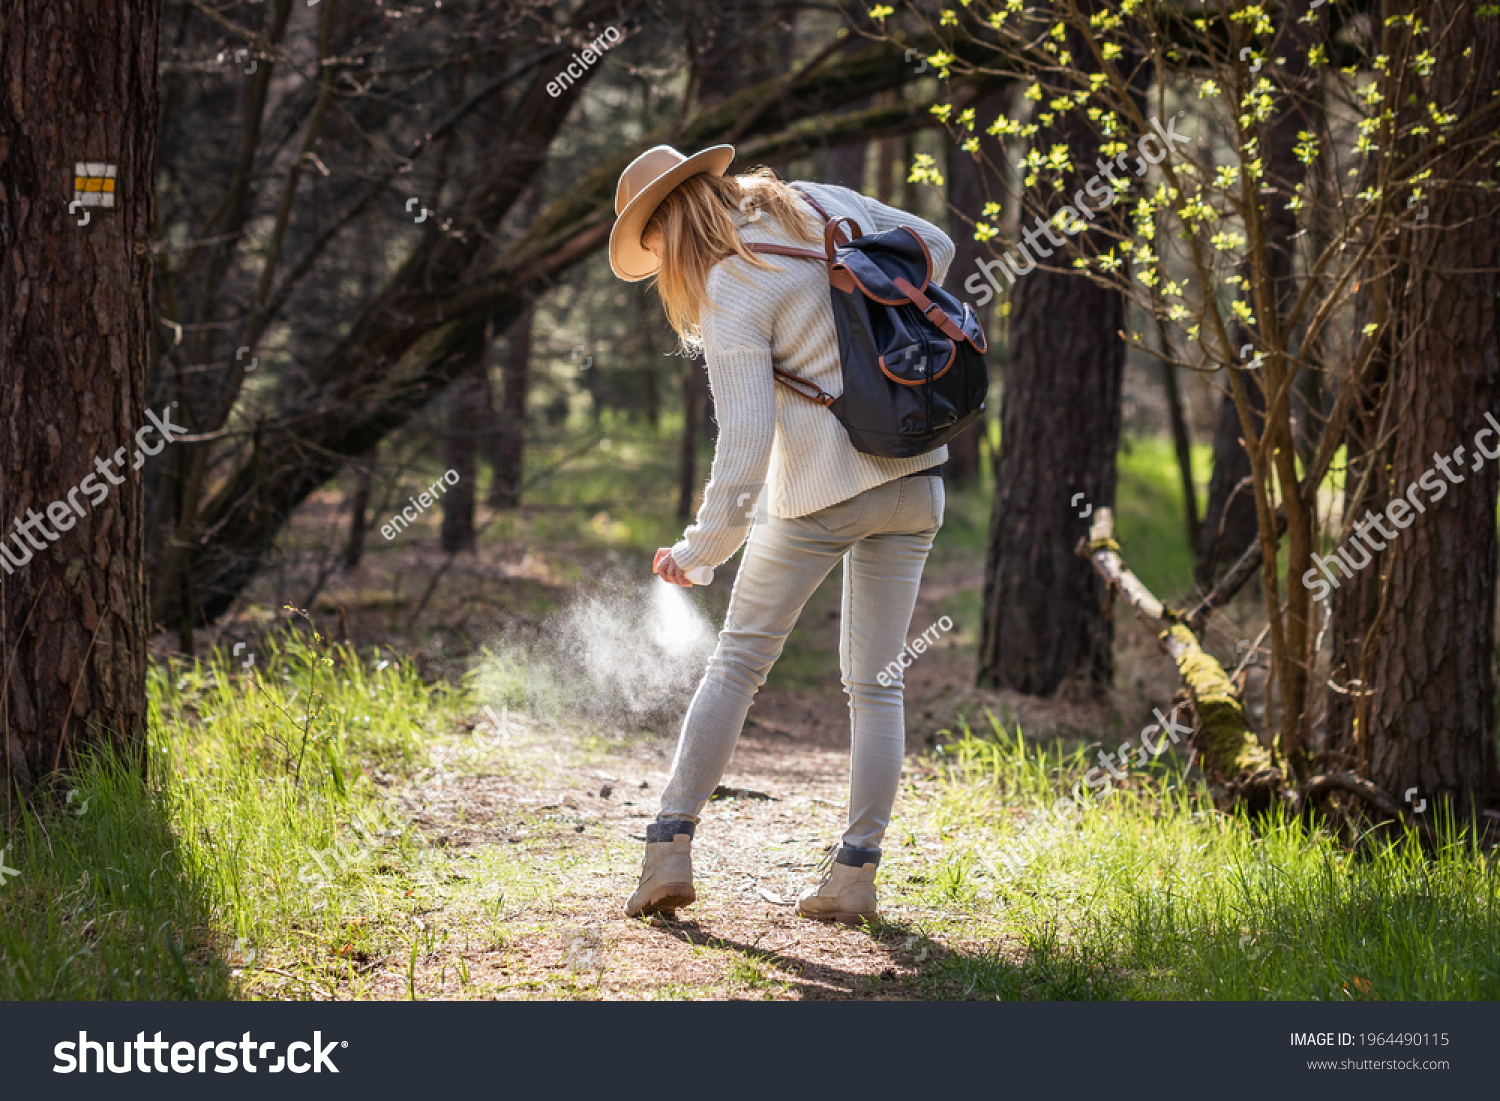 Woman spraying insect repellent against tick at her legs. Protection against mosquito bite during hike in woodland #1964490115